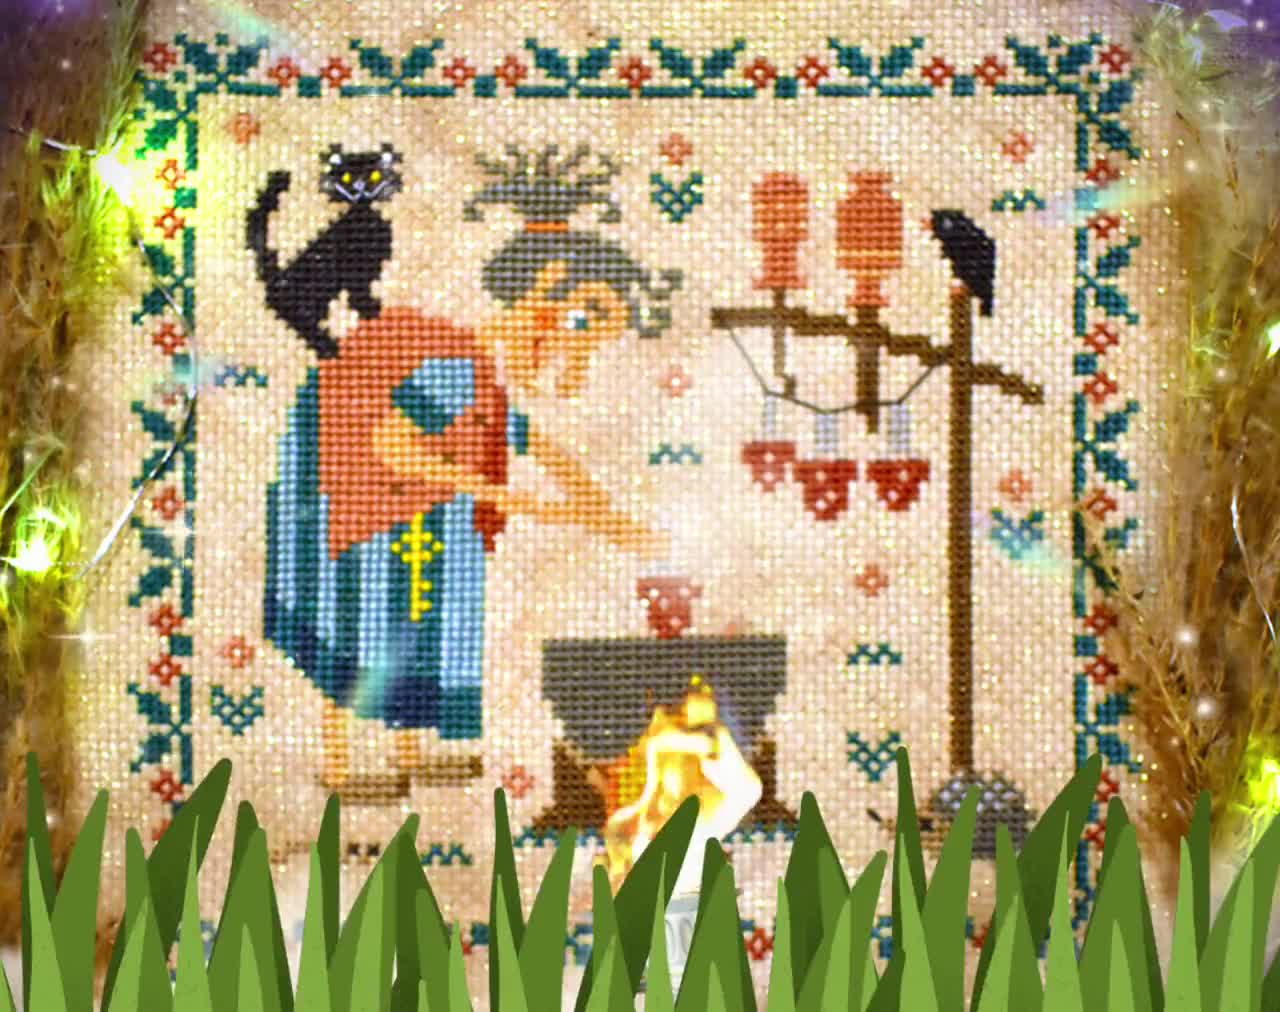 NUESTRA FAMILIA - Family Tree - Vintage CROSS STITCH KIT by CREATIVE  CIRCLE